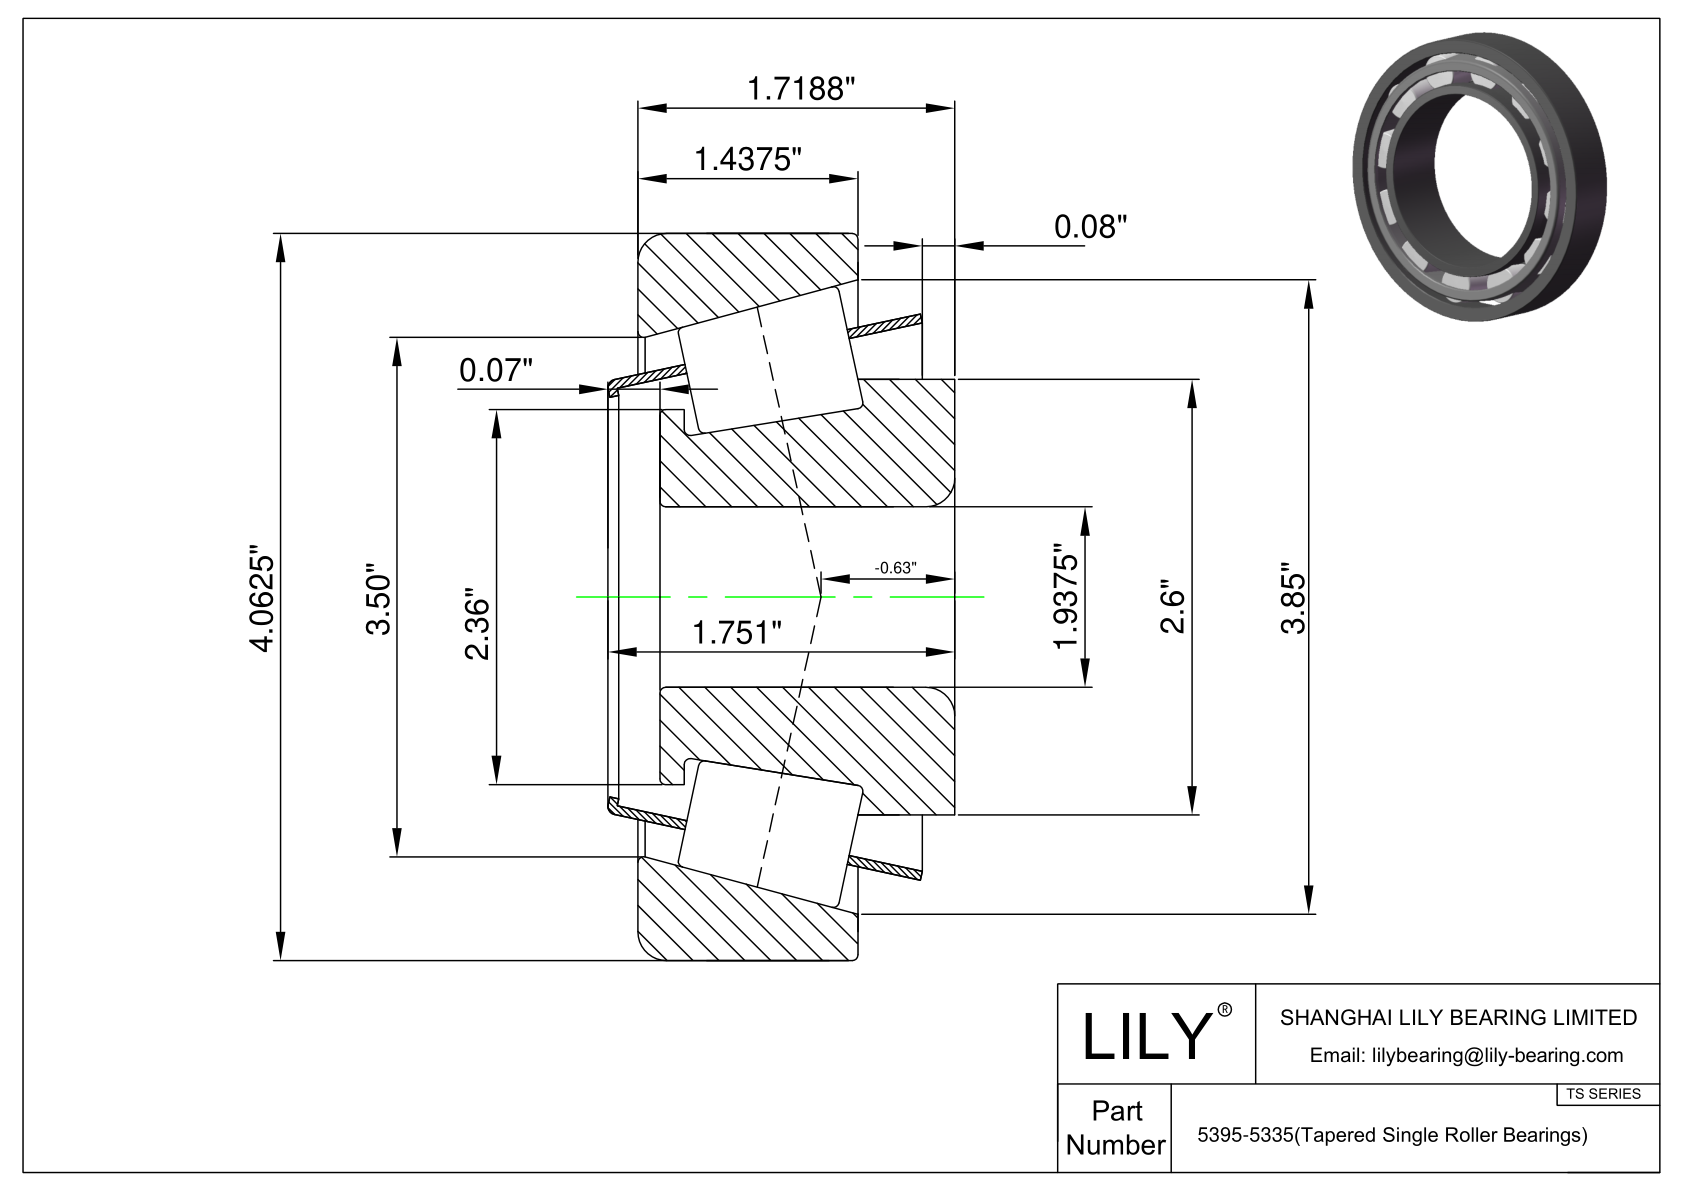 5395-5335 TS (Tapered Single Roller Bearings) (Imperial) cad drawing